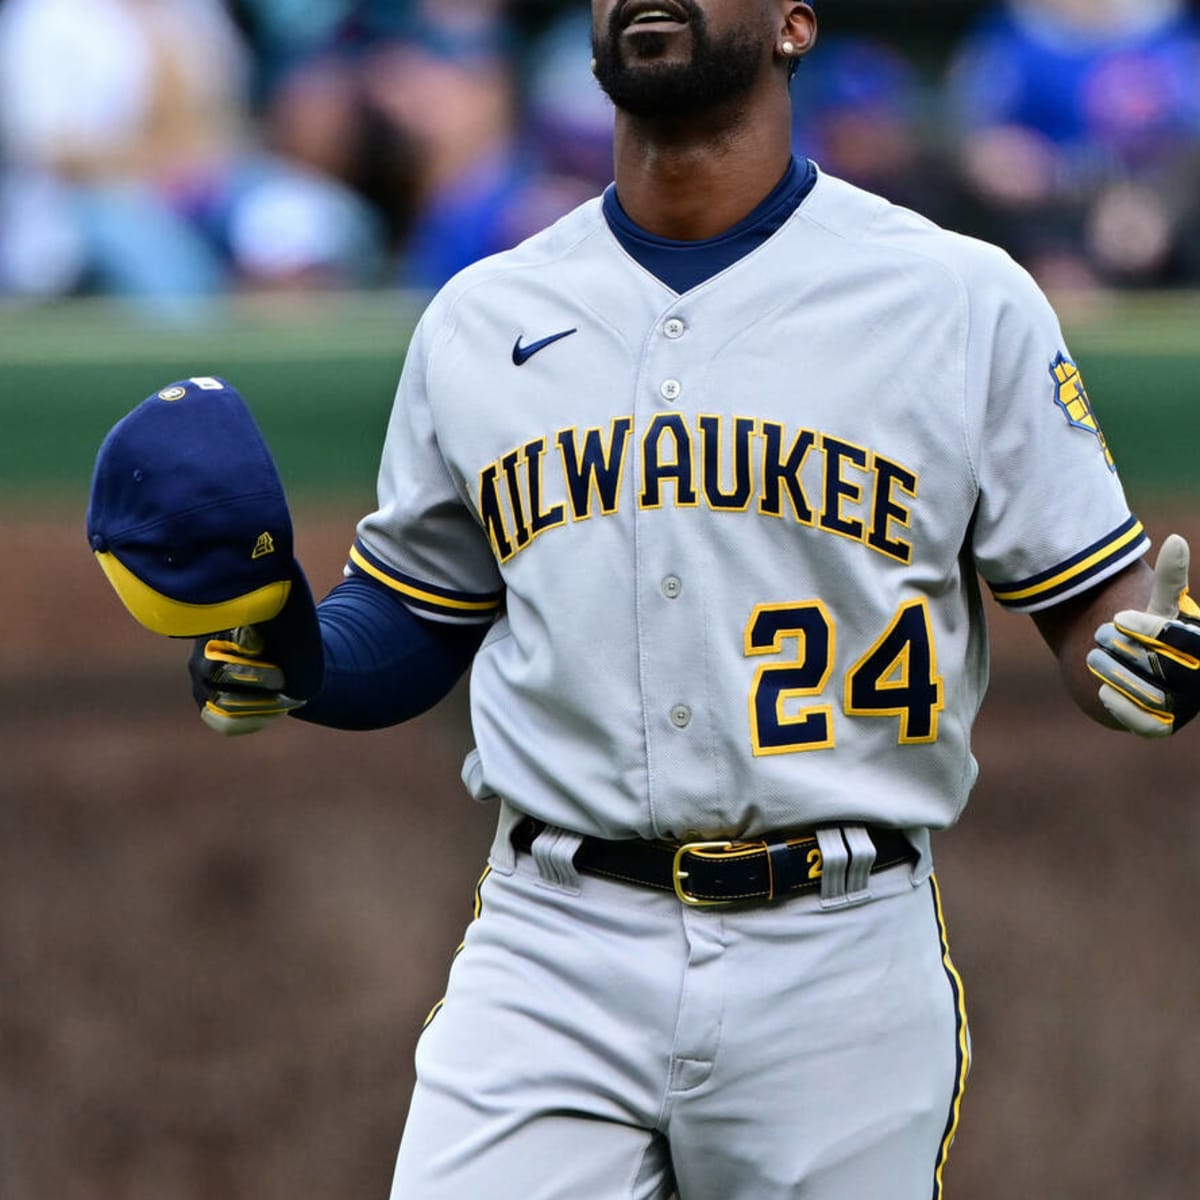 Brewers, Cubs benches clear after Andrew McCutchen HBP